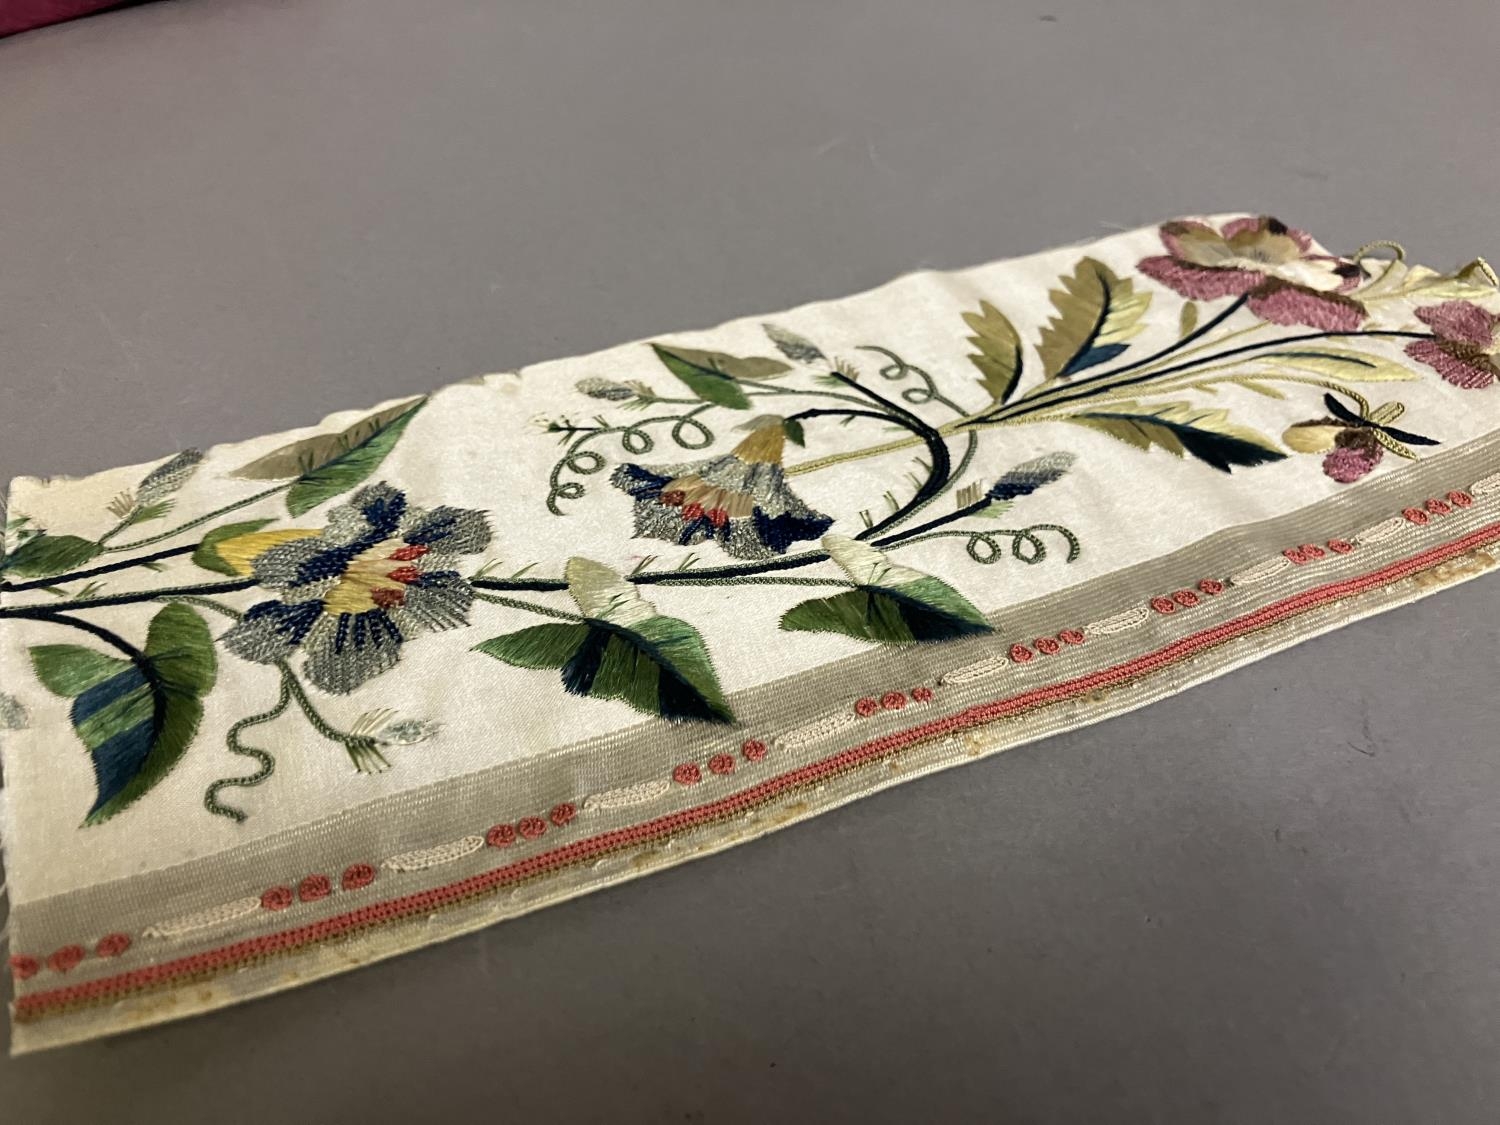 Fine 19th century ribbon work and embroidery: Seven items/examples of a lady’s handiwork, as - Image 3 of 4